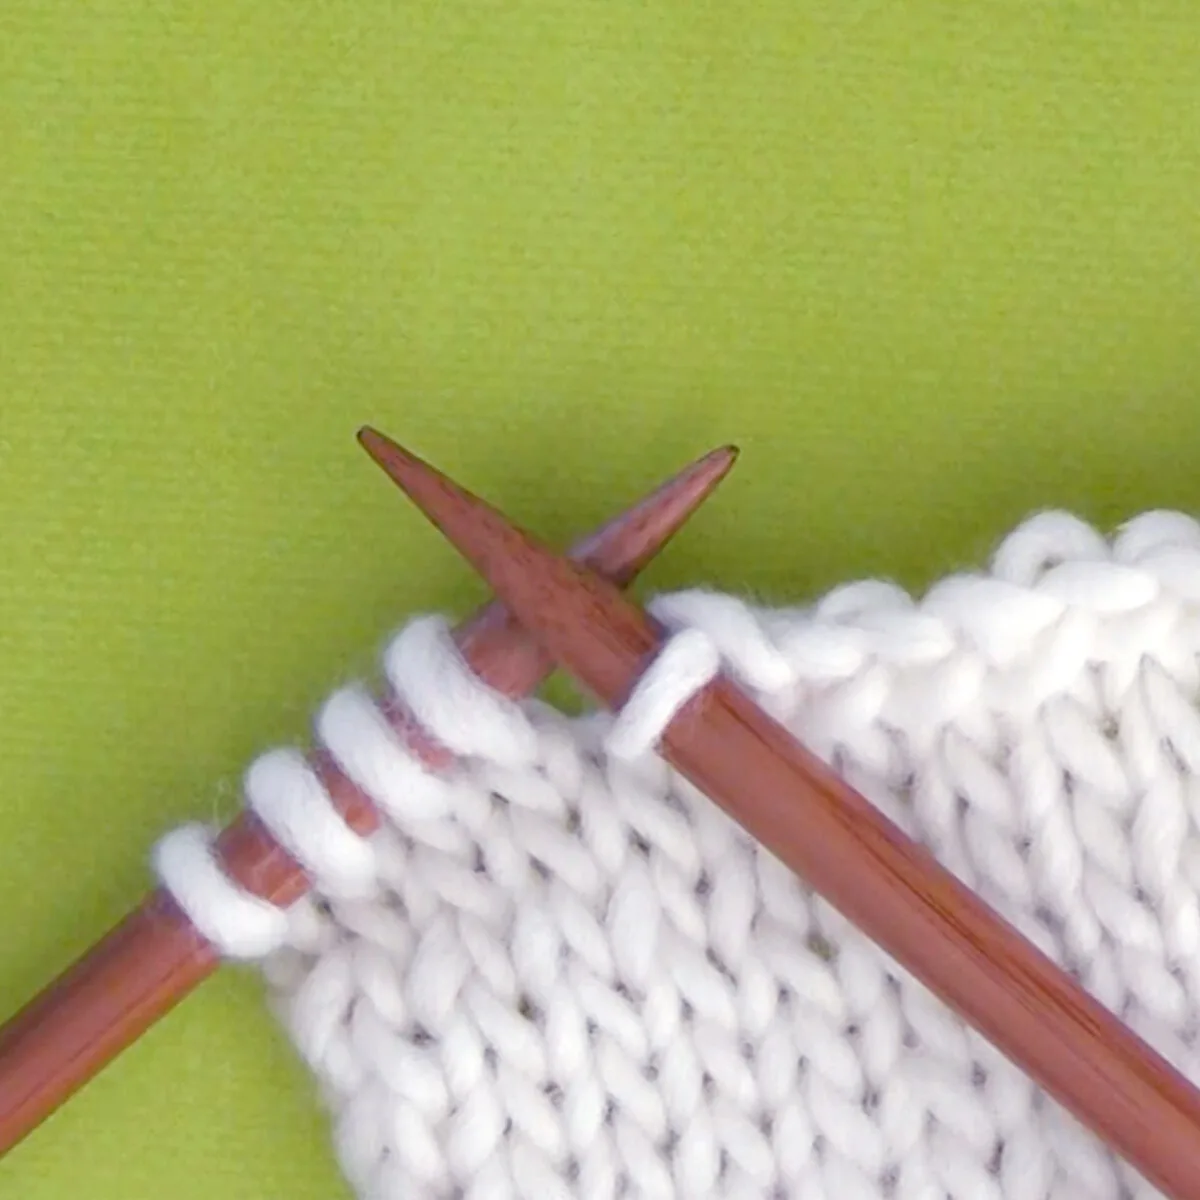 Knitted swatch of white yarn in stockinette stitch pattern with two wooden knitting needles.